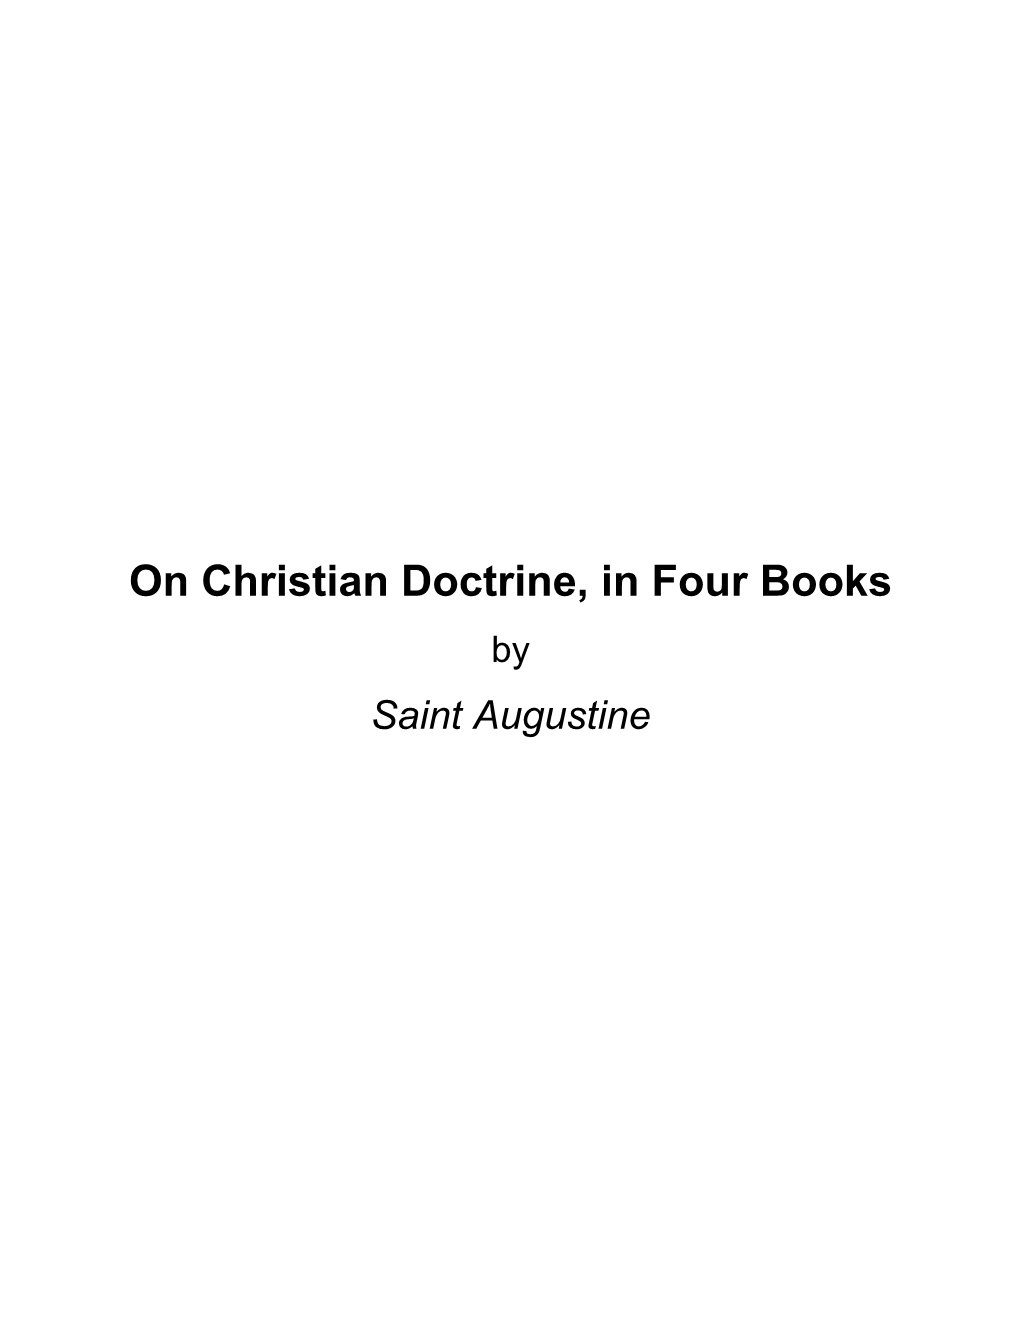 On Christian Doctrine, in Four Books by Saint Augustine About on Christian Doctrine, in Four Books by Saint Augustine